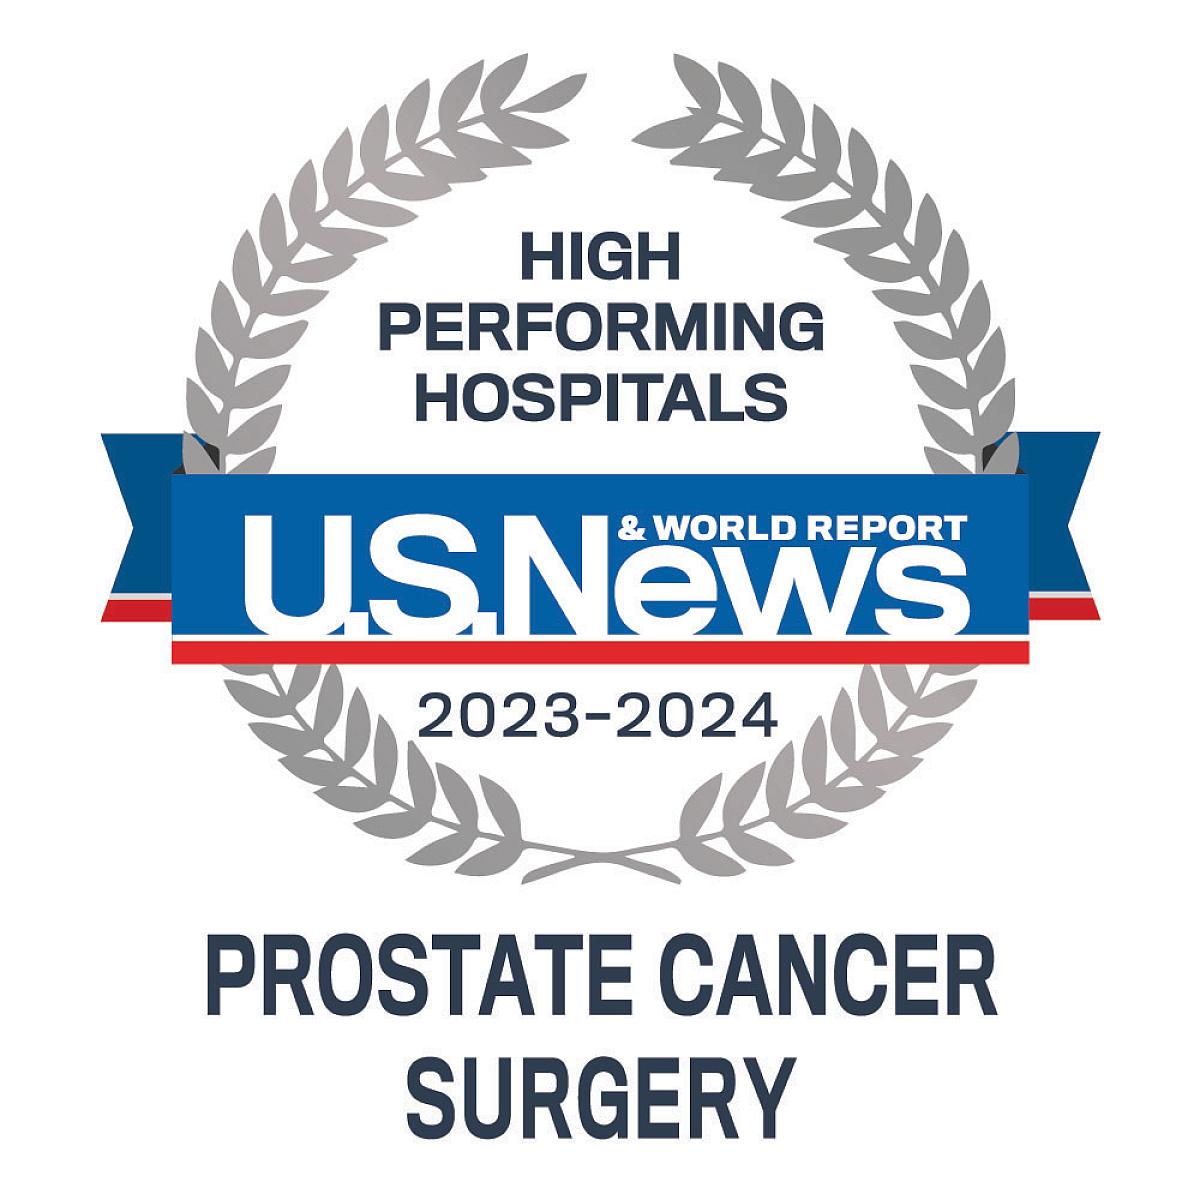 US News High Performing Hospitals - Prostate Cancer Surgery